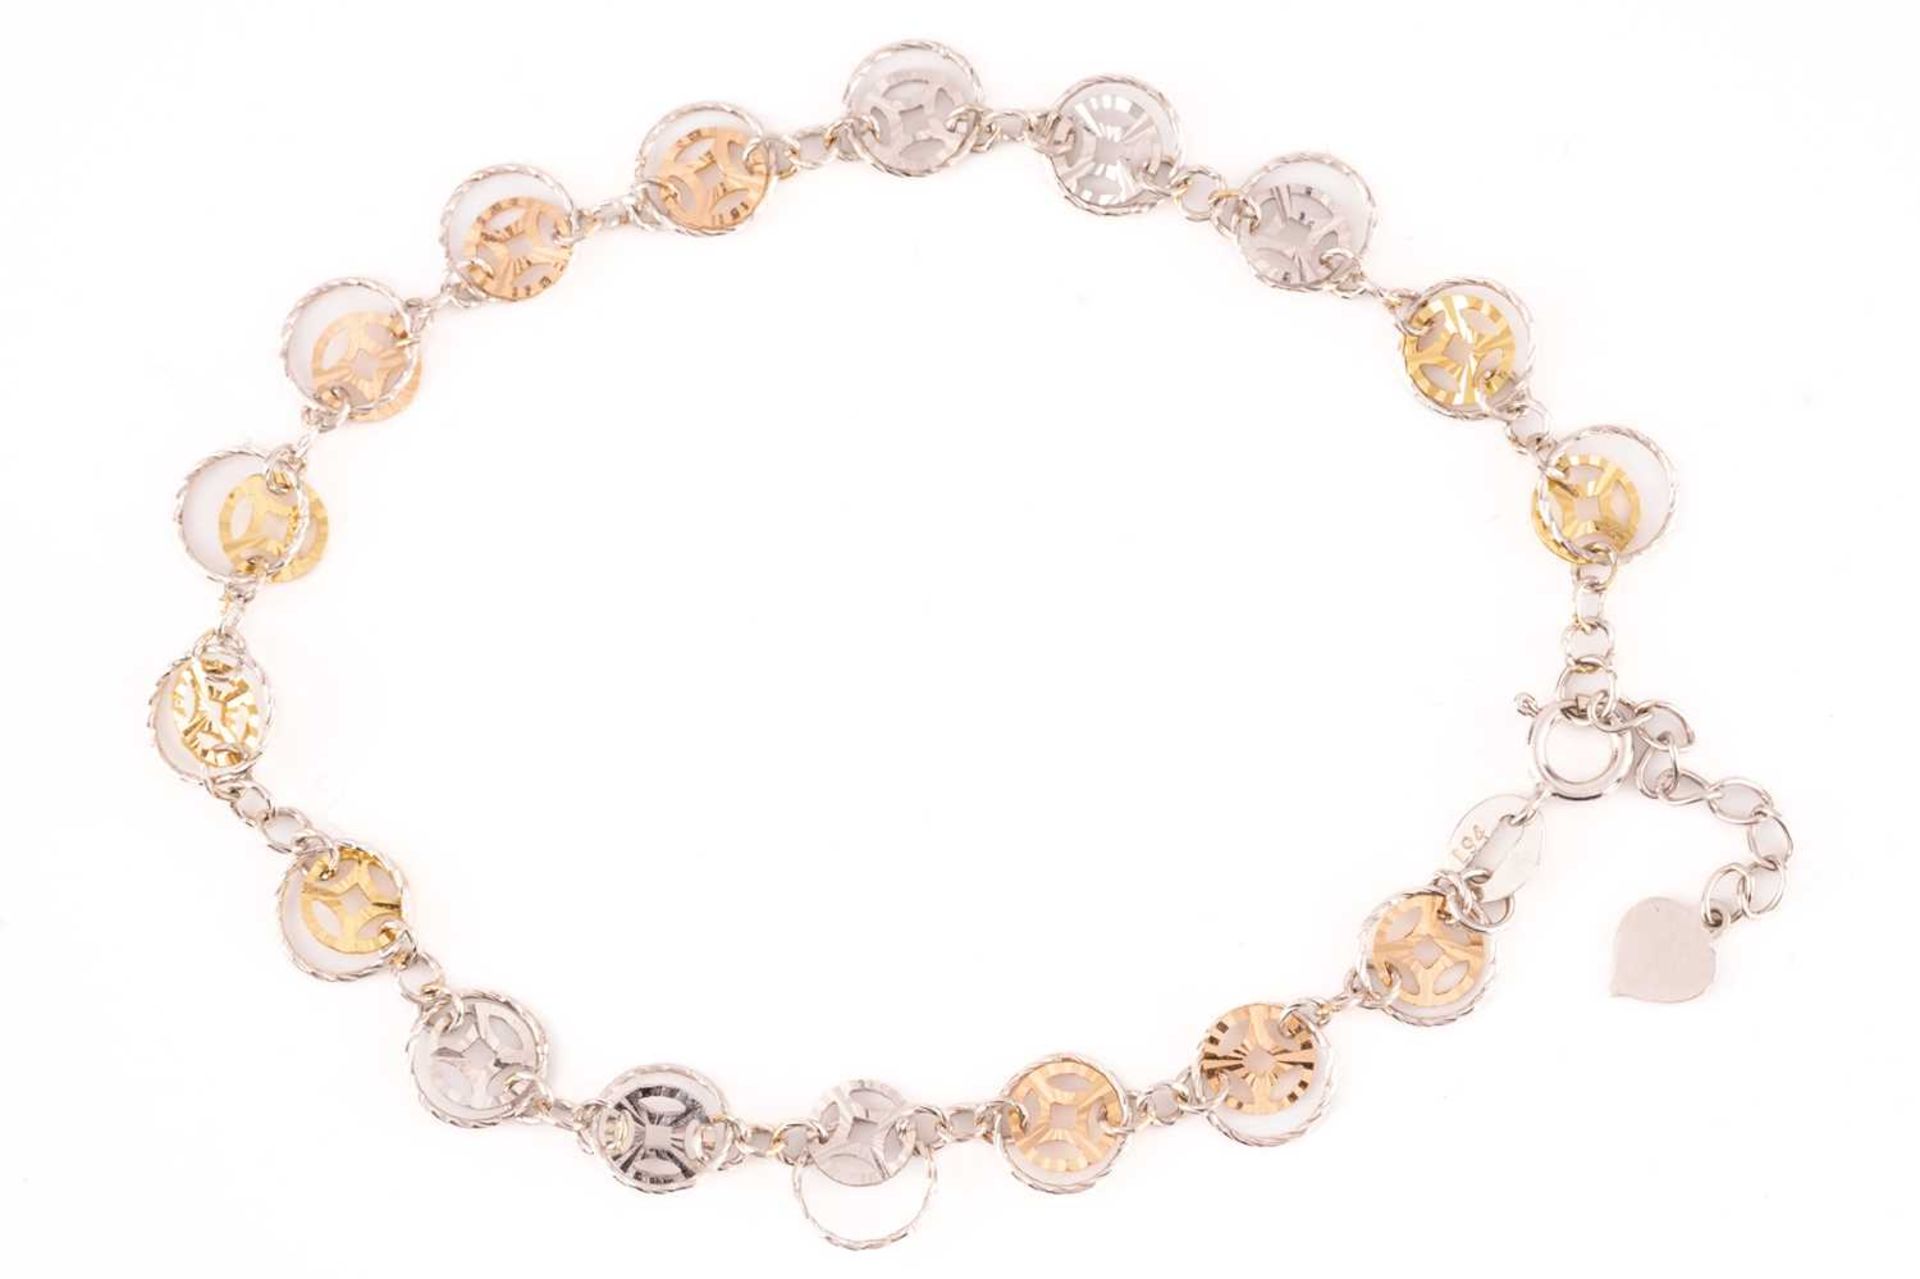 A three-tone 'Prosperity' bracelet, by Lukfook Jewellery, comprising links in the form of Chinese